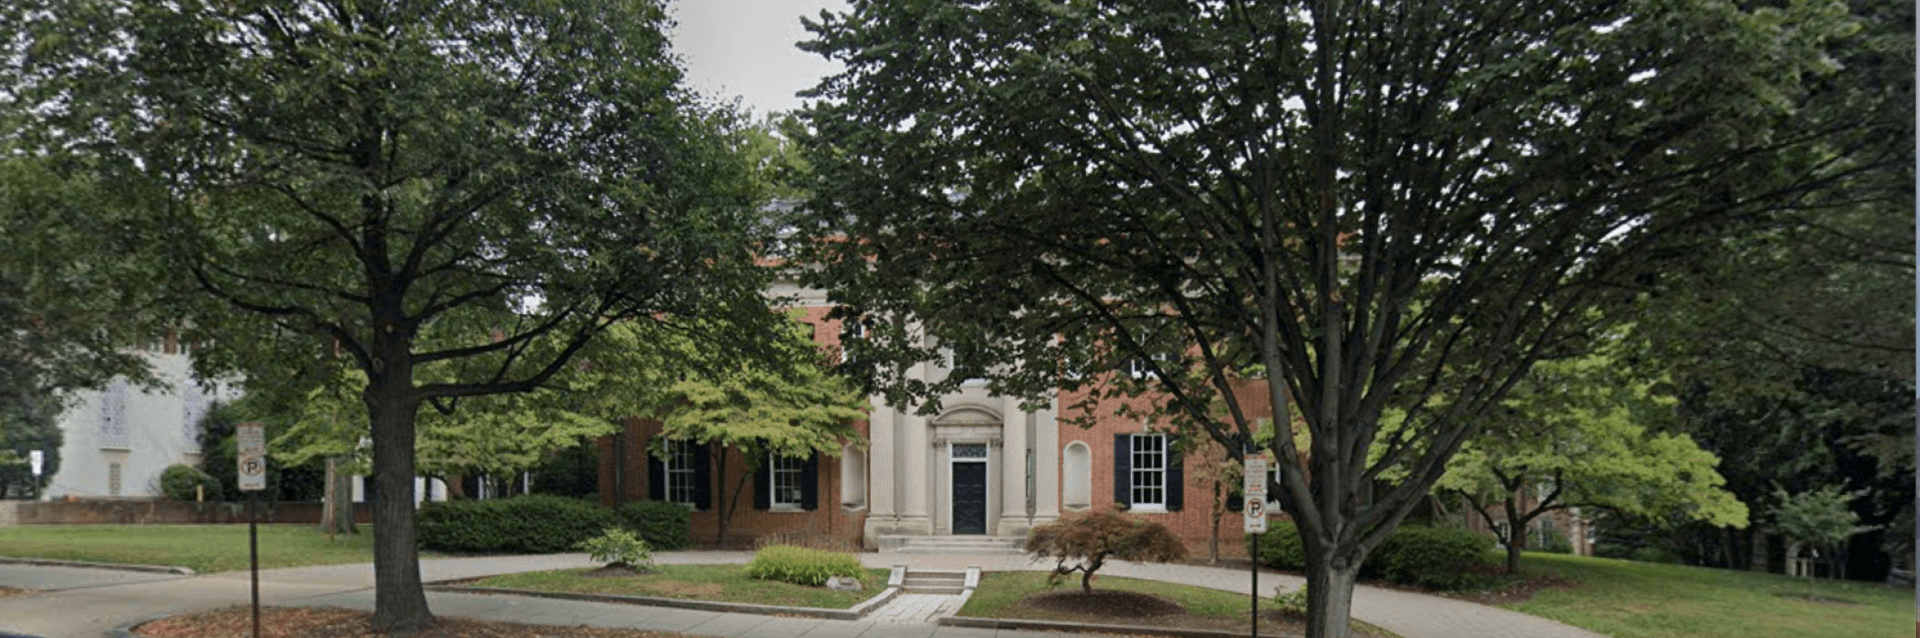 The former Iranian ambassador's residence in Washington, DC, has been empty for a long time. 